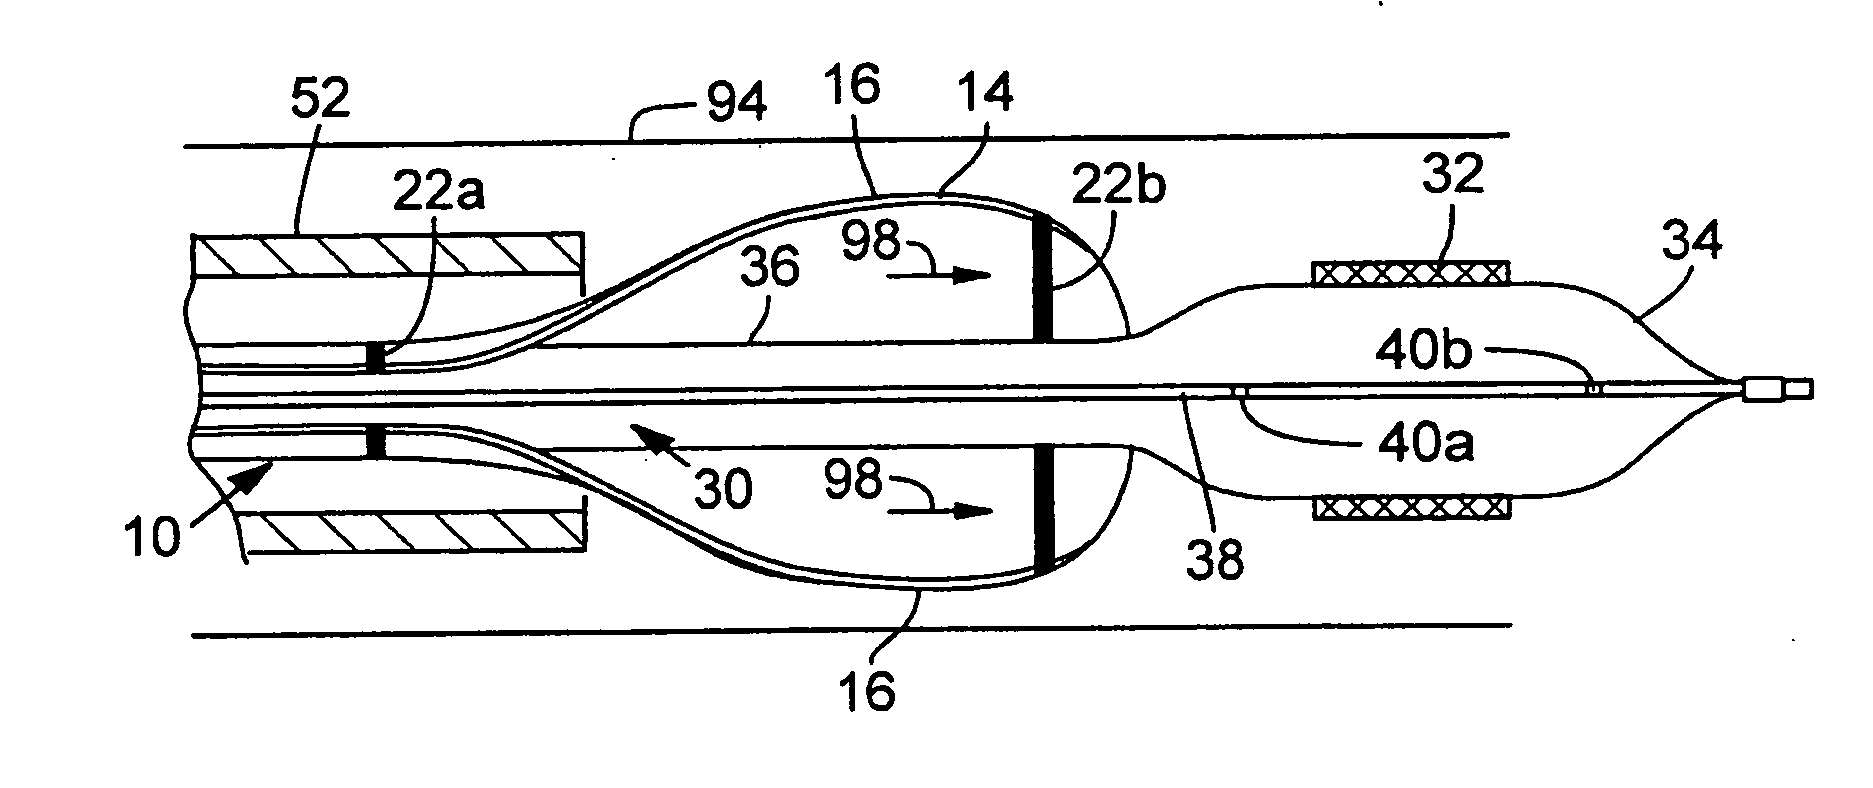 System for percutaneous delivery and removal of a prosthetic valve